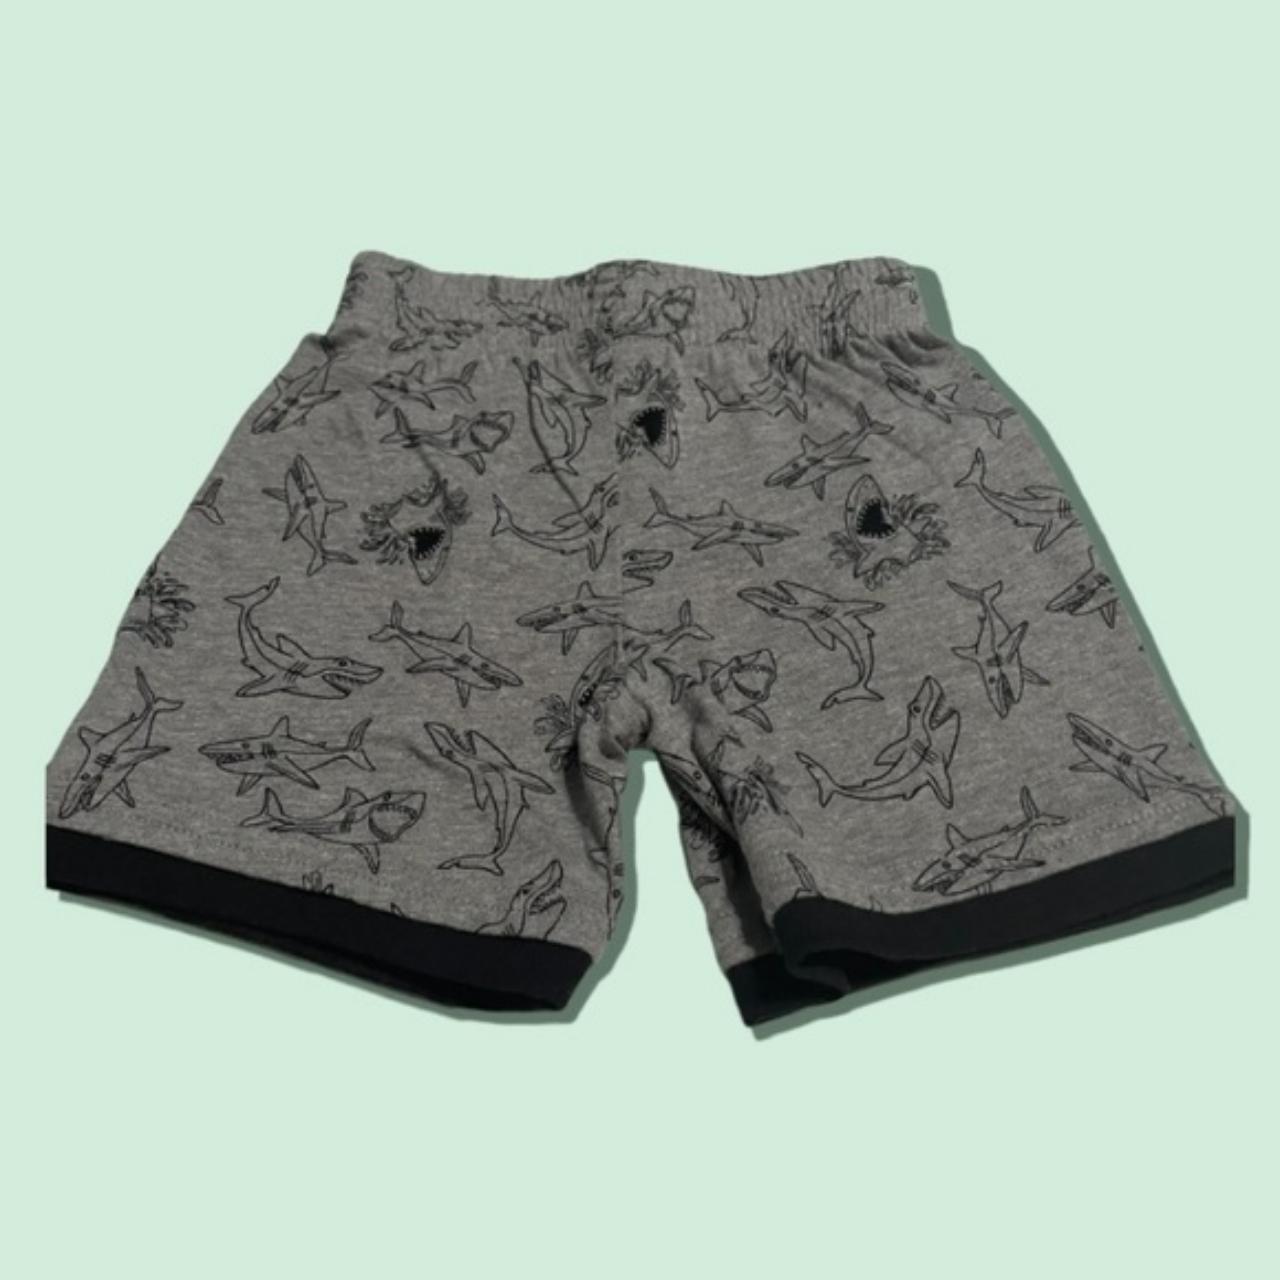 Product Image 2 - Garanimals Shark Shorts

Condition: Pre-Owned Good

excellent